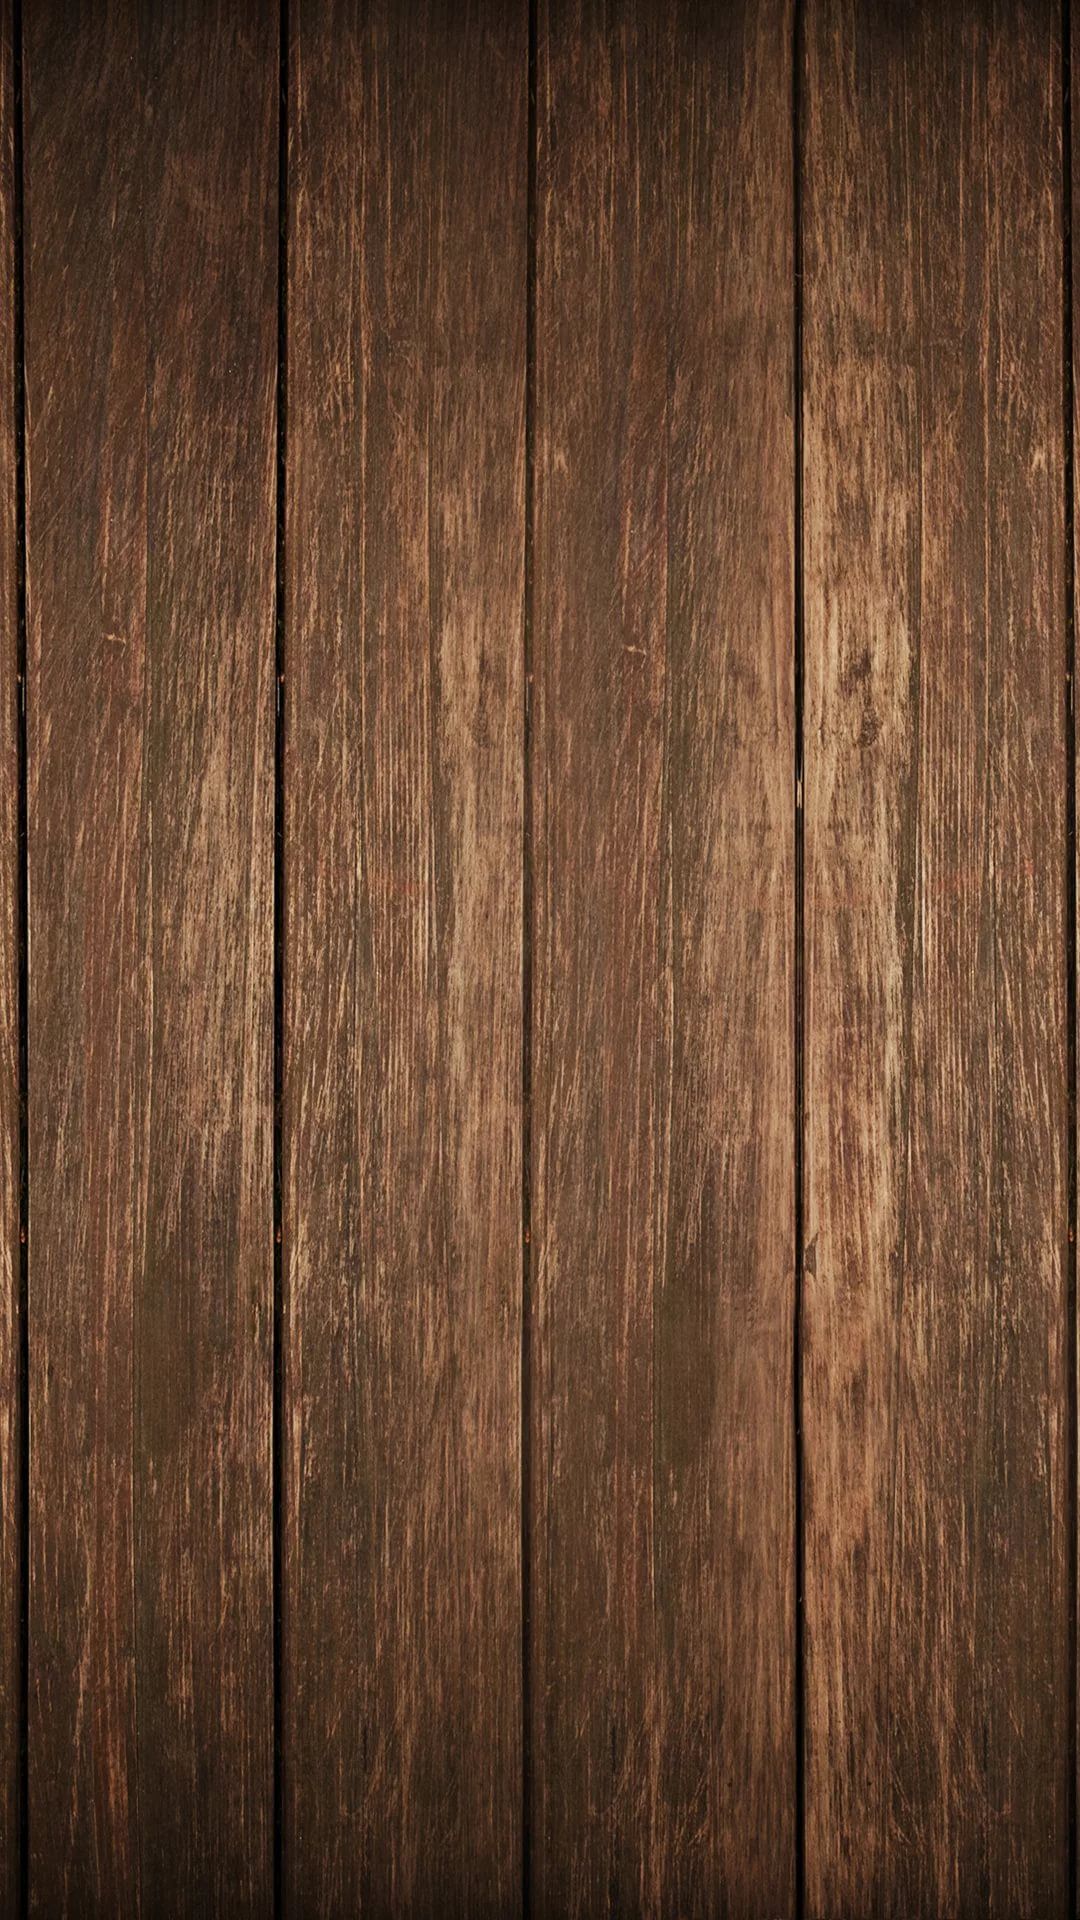 Wood Hd wallpaper for iPhone